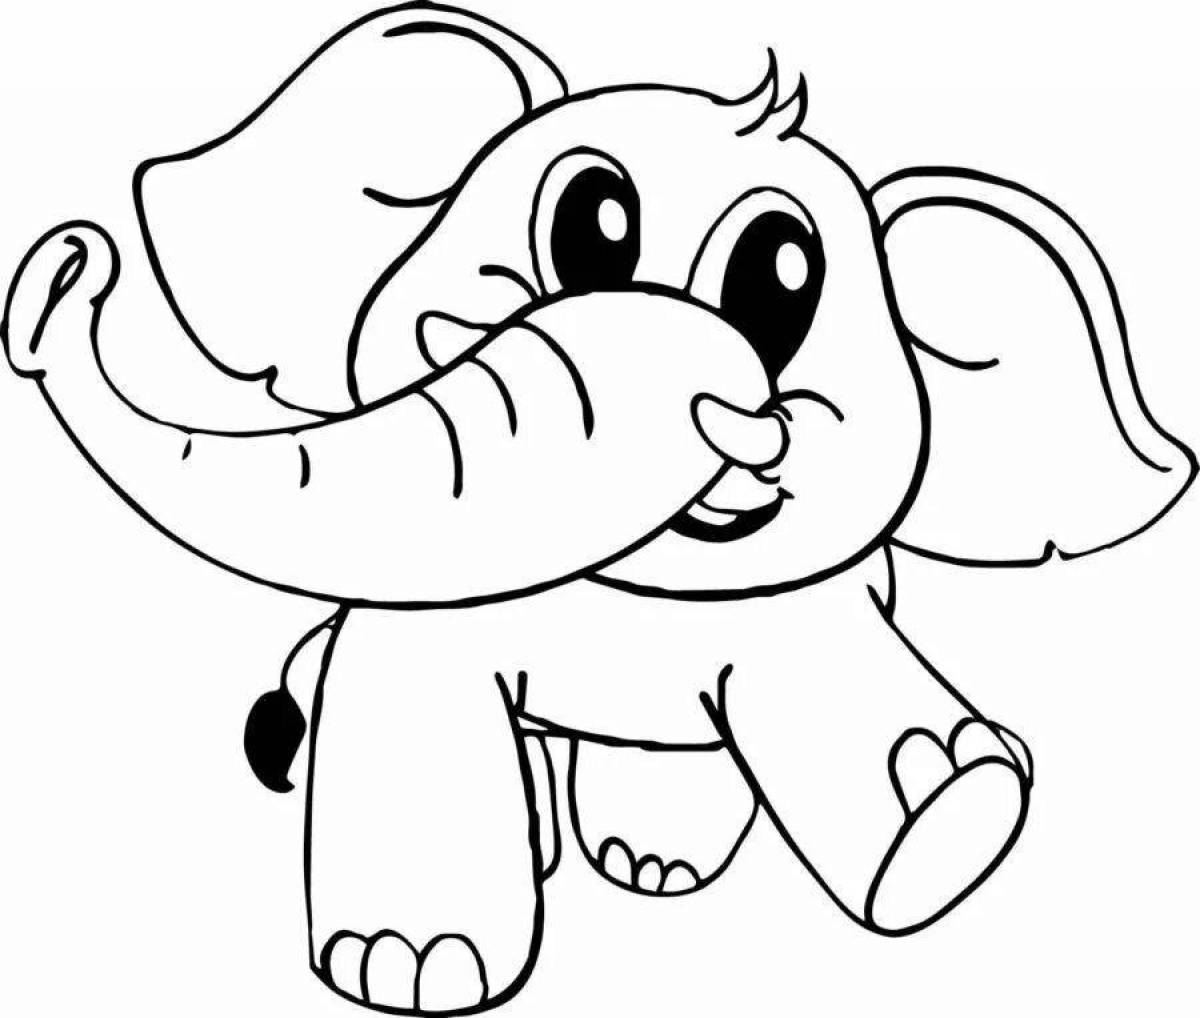 Playful pink elephant coloring page